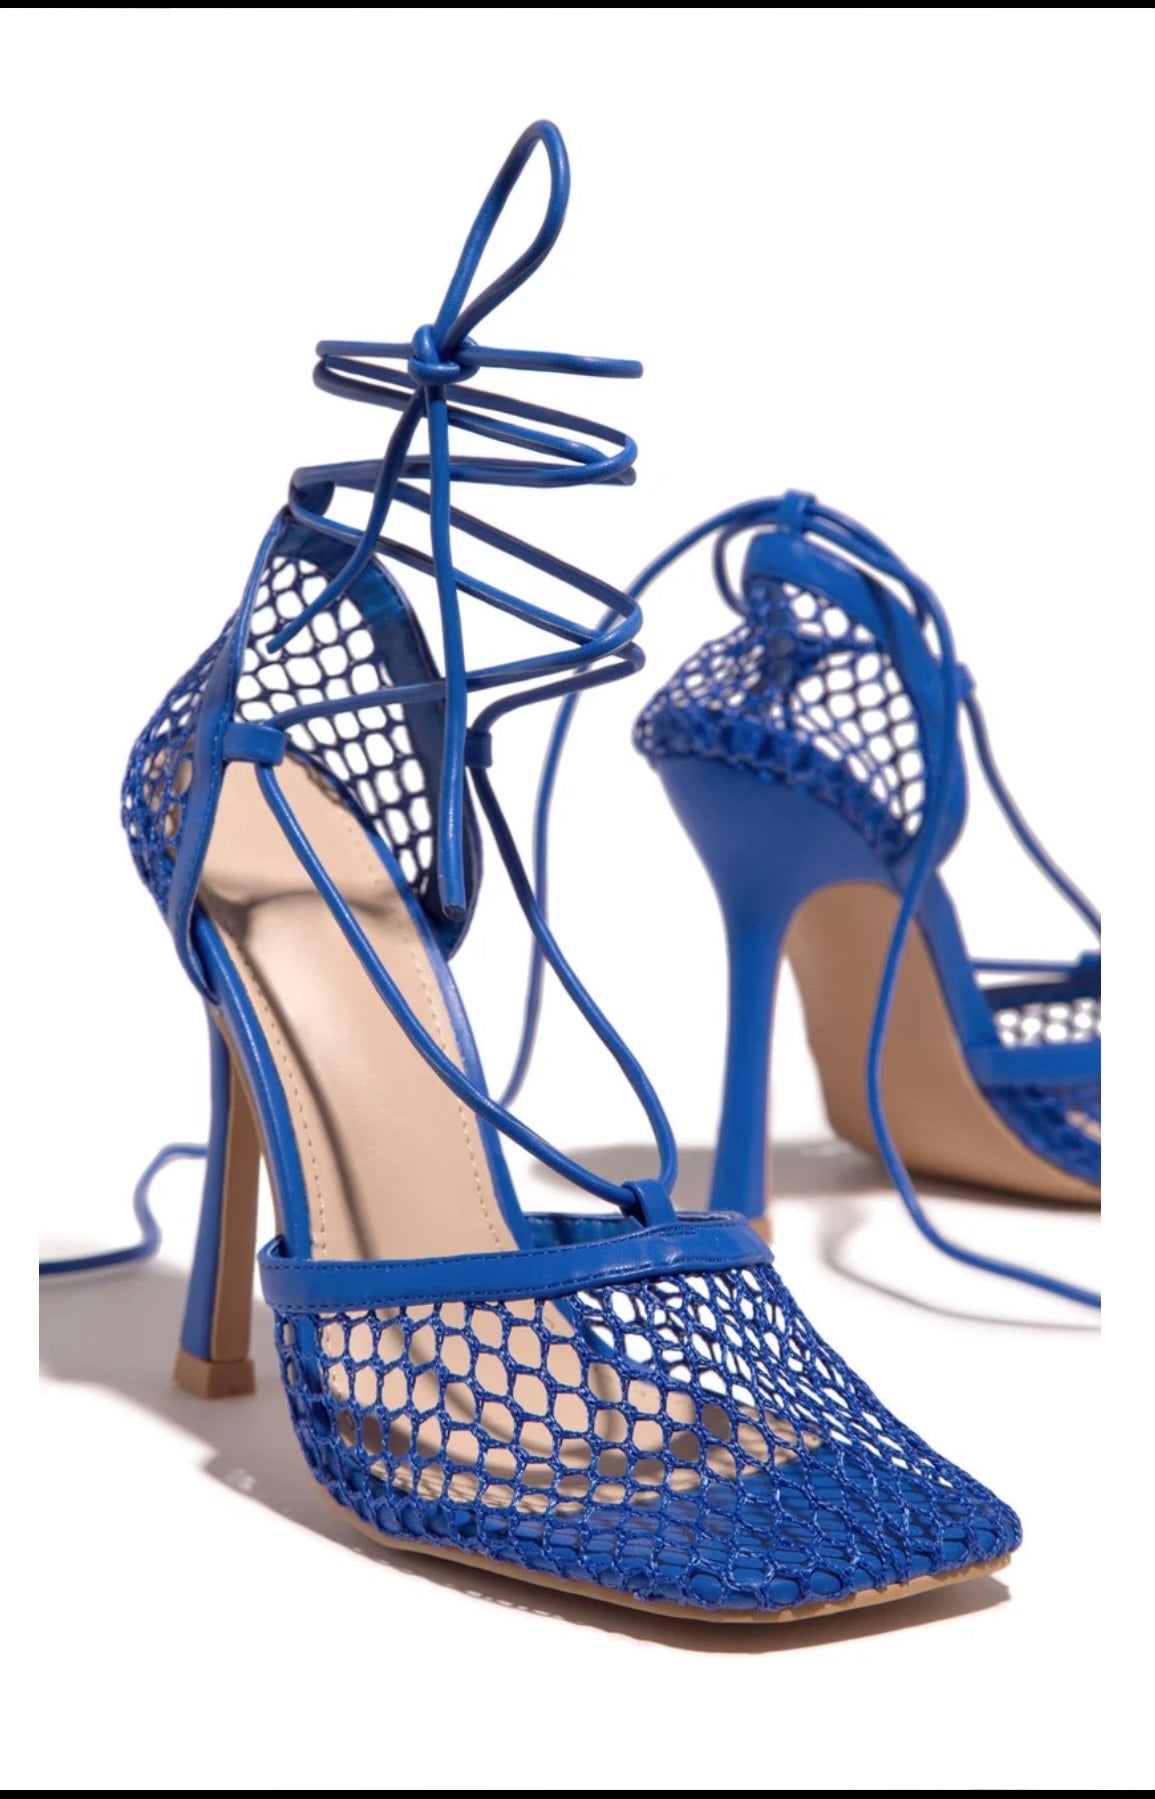 Peek-a-Boo Perfection: Show off Your Style with Mesh Heels